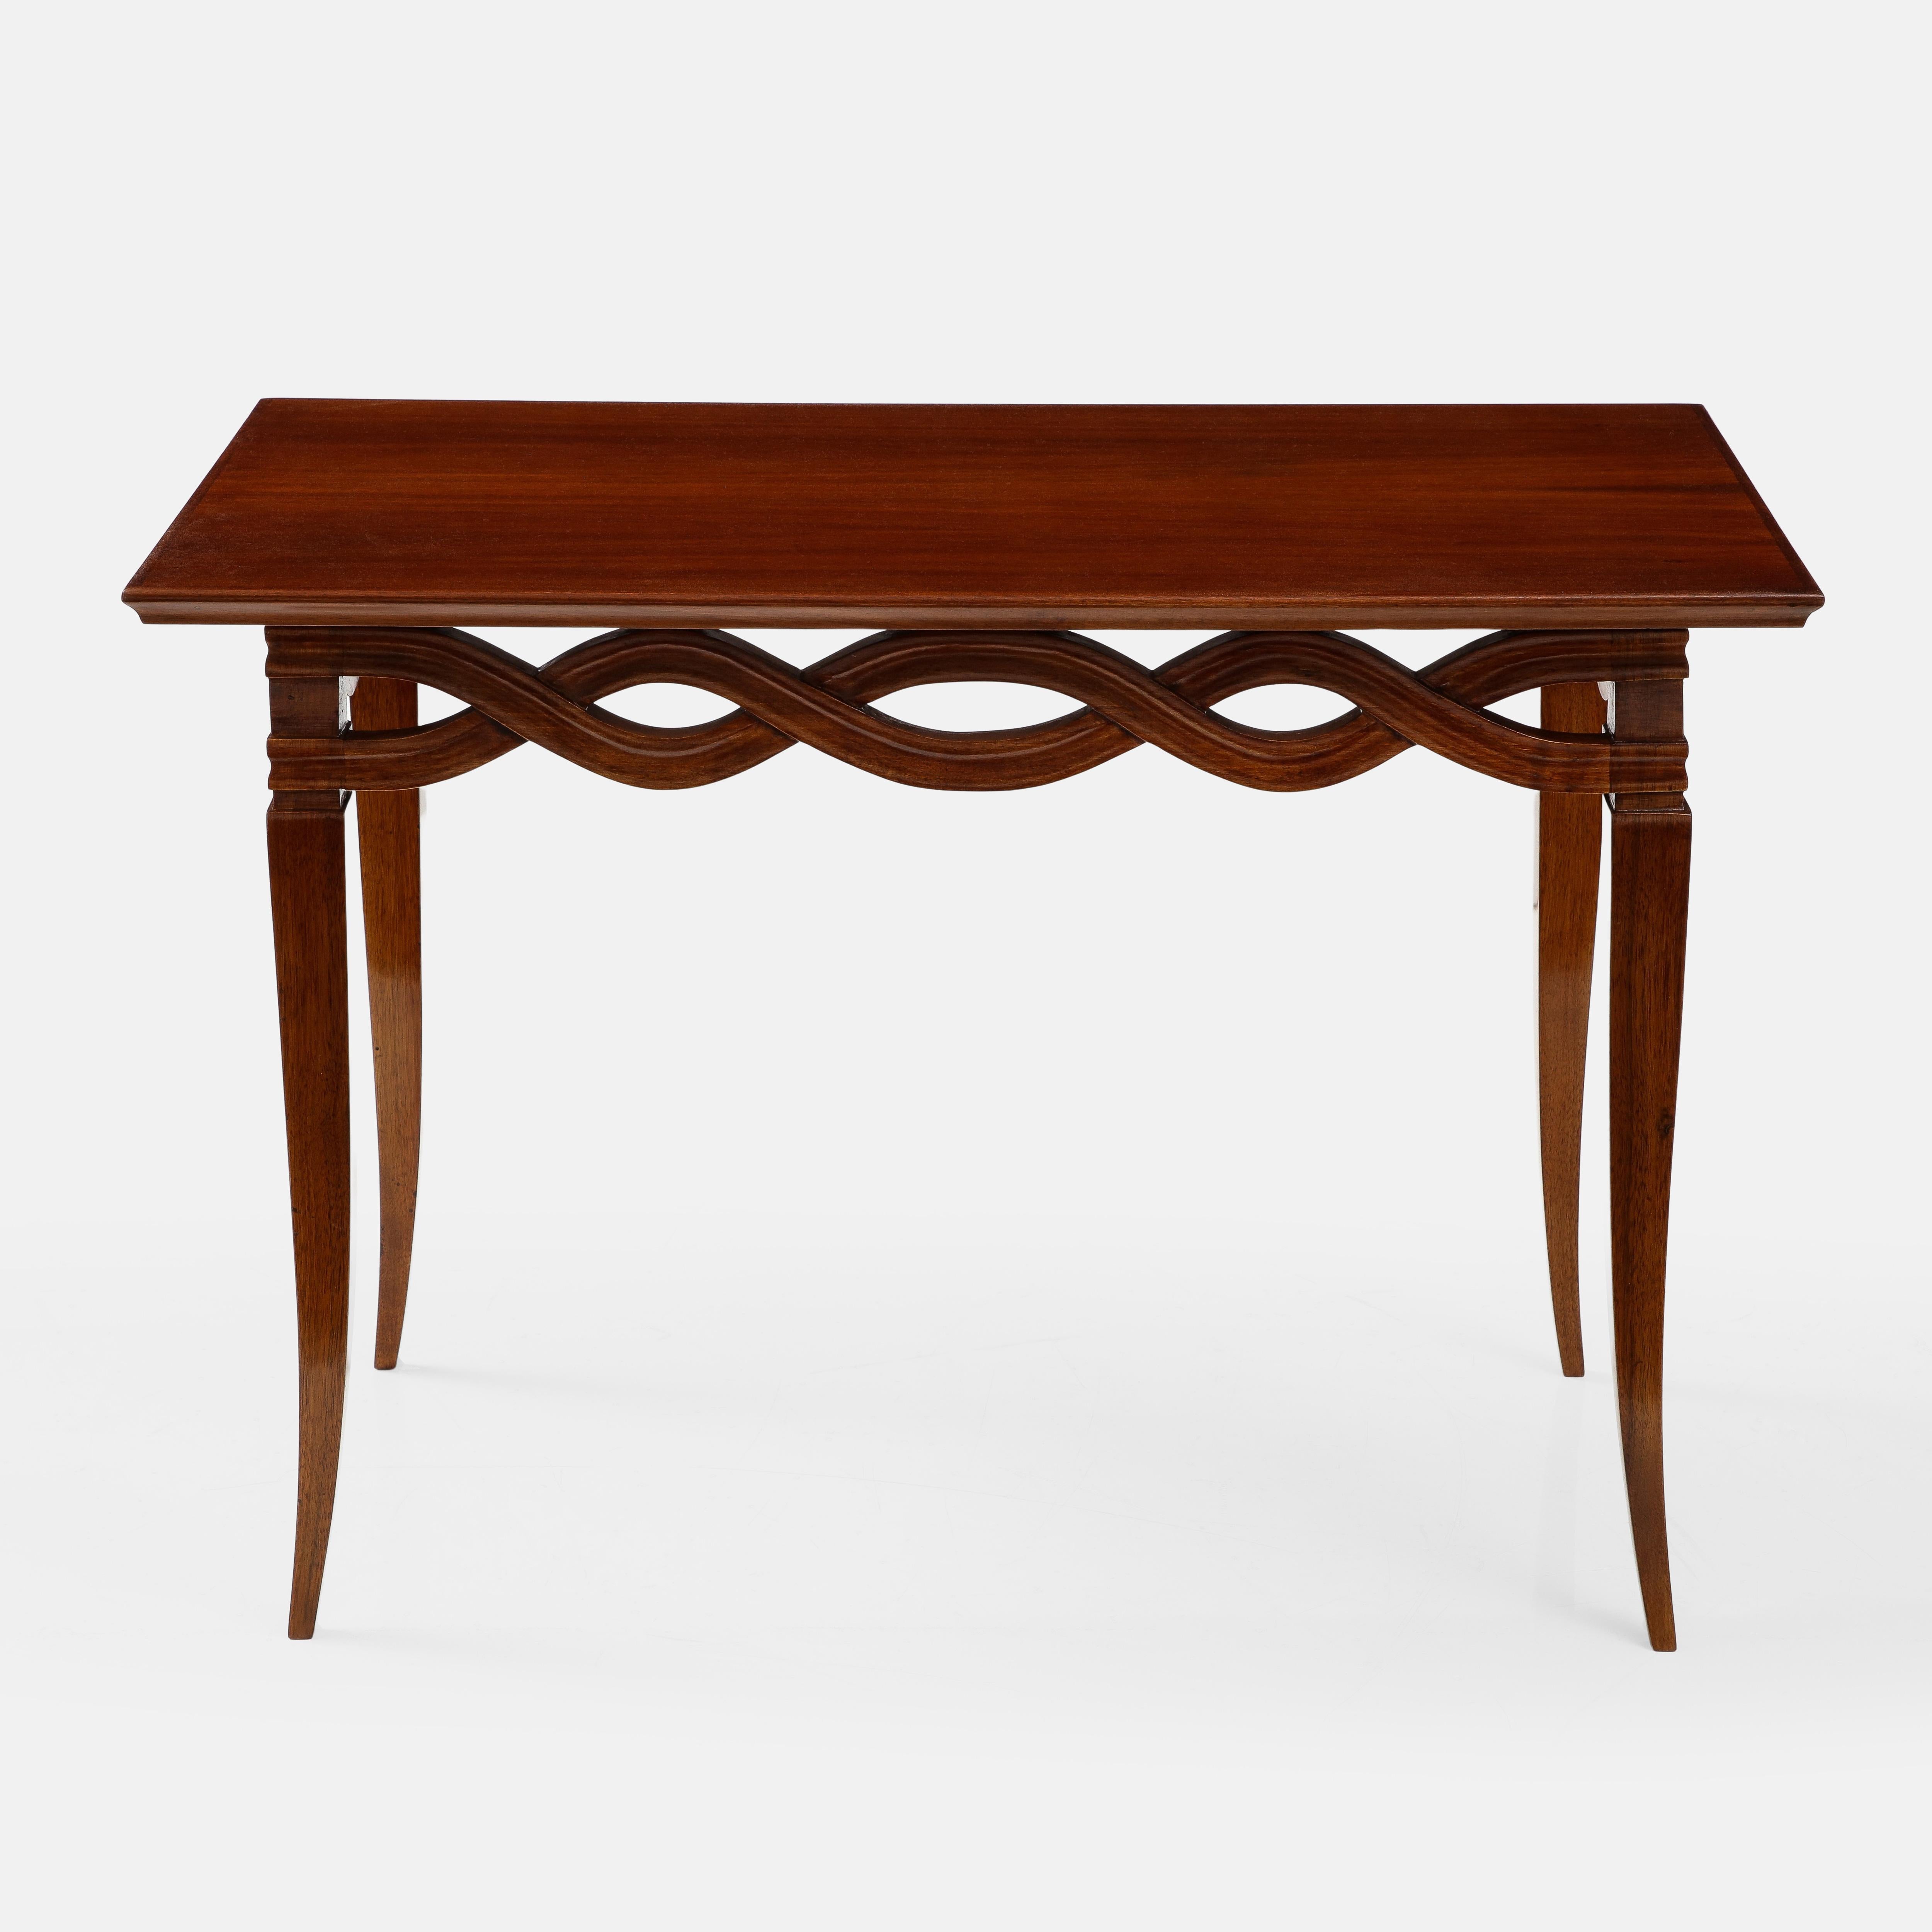 Mid-20th Century Rare Small Walnut Coffee or Side Table Attributed to Paolo Buffa, Italy, 1940s For Sale